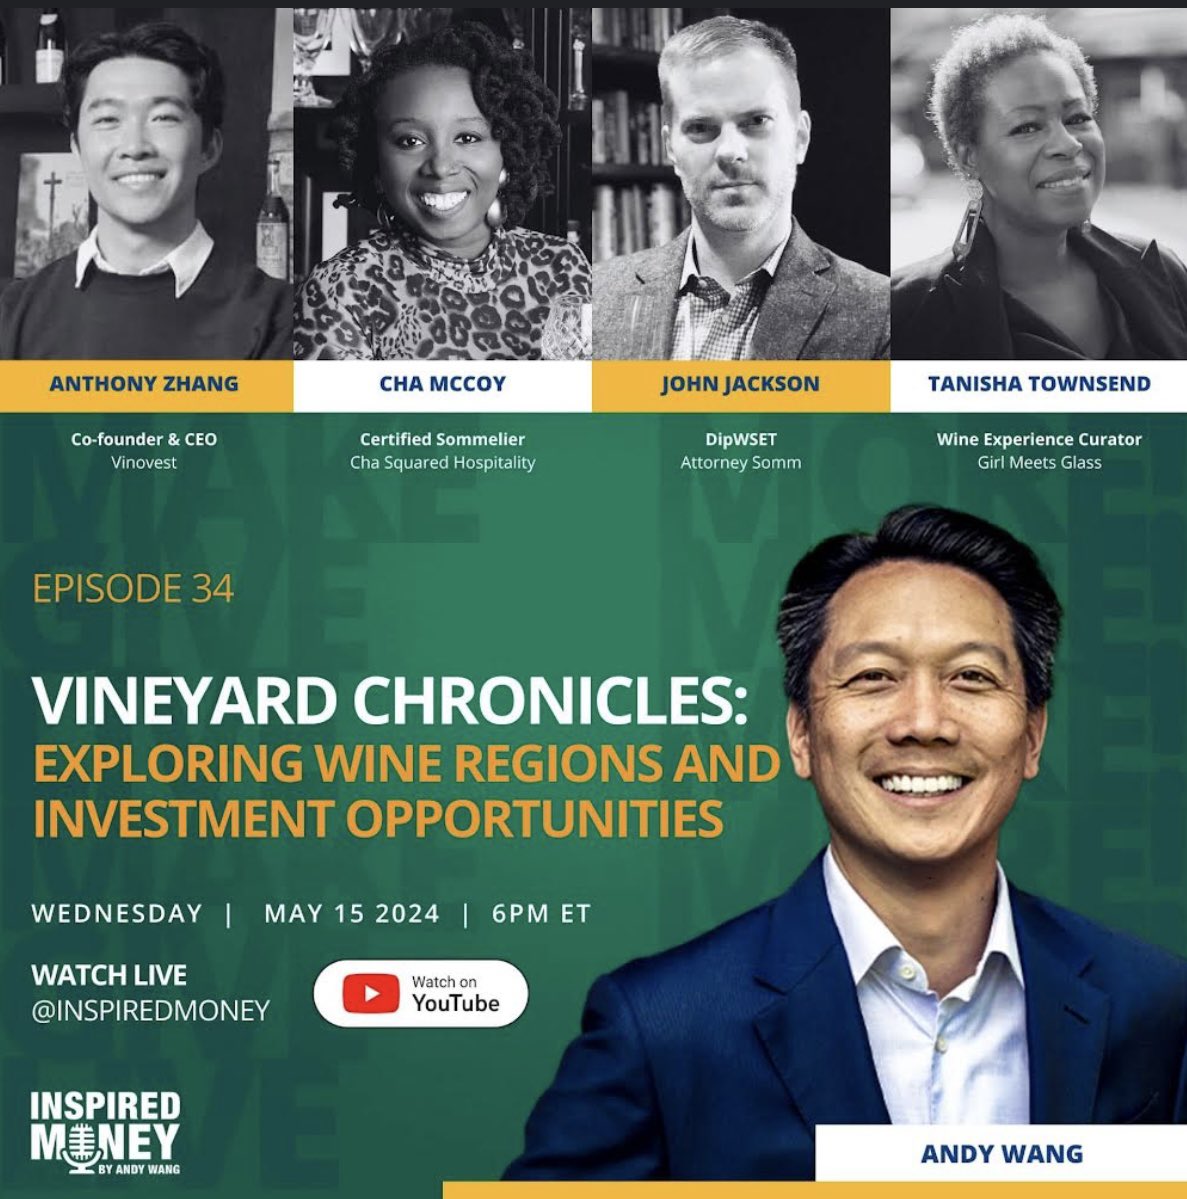 Looking forward to participating in this podcast on wine investment! youtube.com/live/oIJilIOBU…